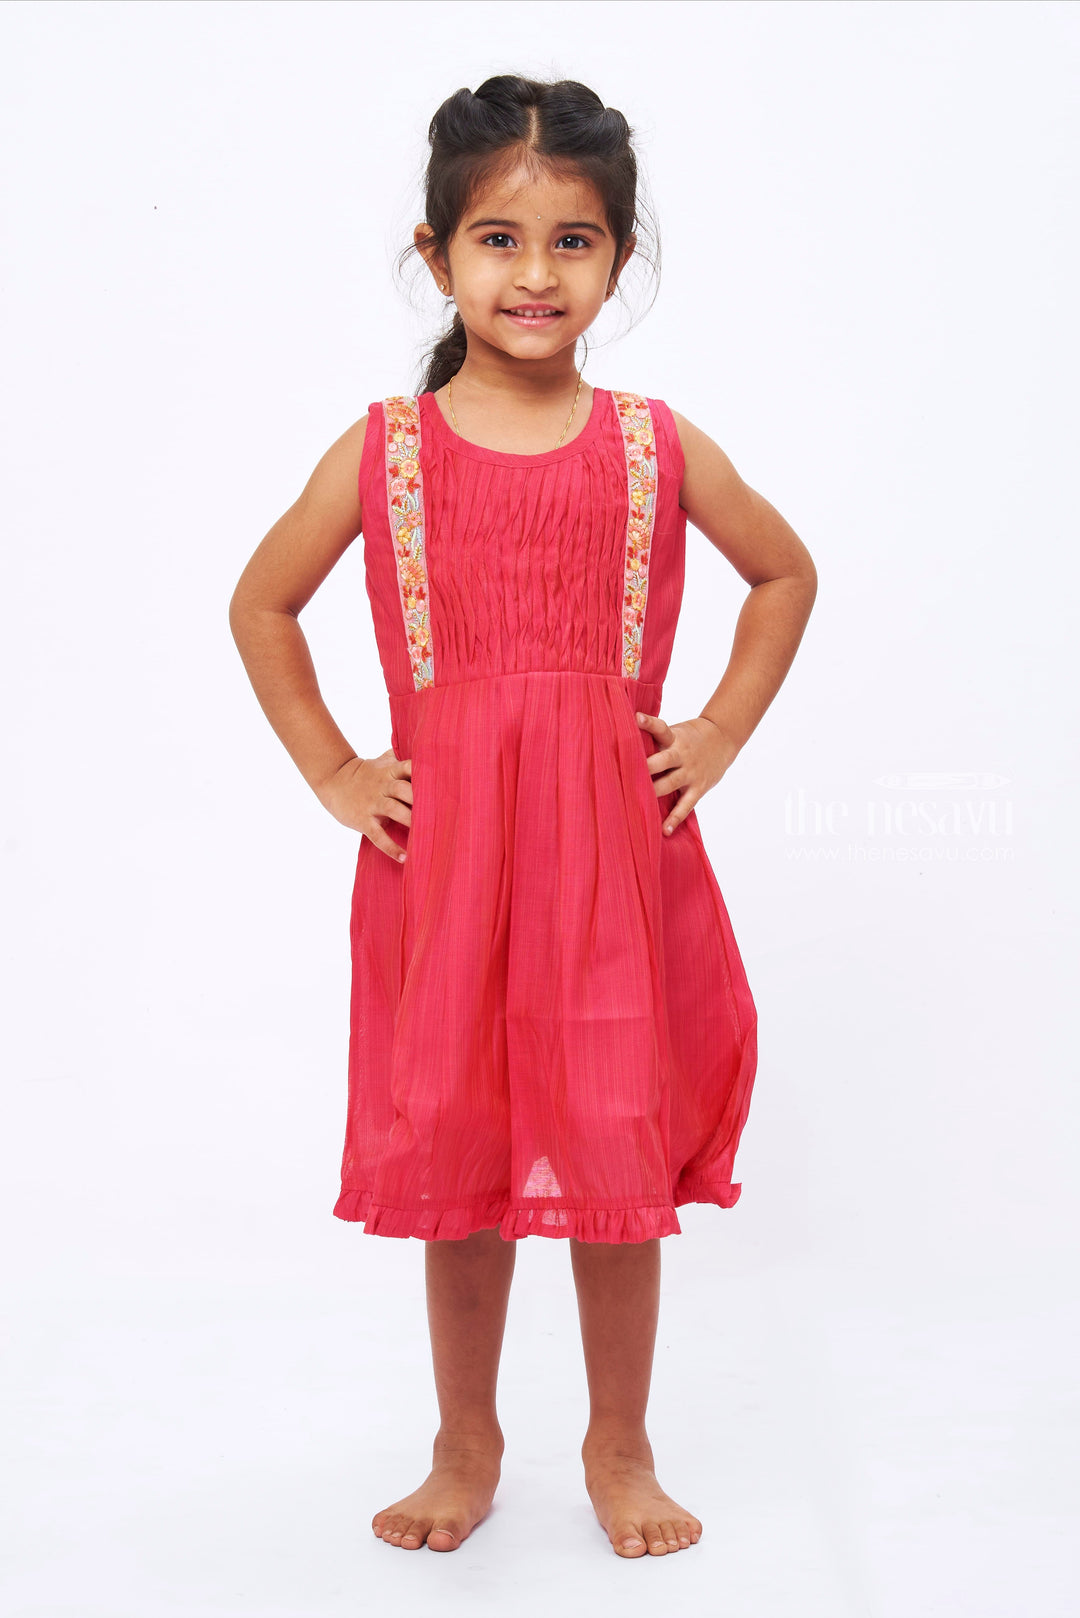 The Nesavu Girls Cotton Frock Pink Blossom Girls Cotton Frock: Floral Embroidery & Pleated Design Nesavu 16 (1Y) / Pink / Chanderi GFC1238A-16 Pink Floral Cotton Frock for Girls | Summer Comfort Daily Wear | The Nesavu